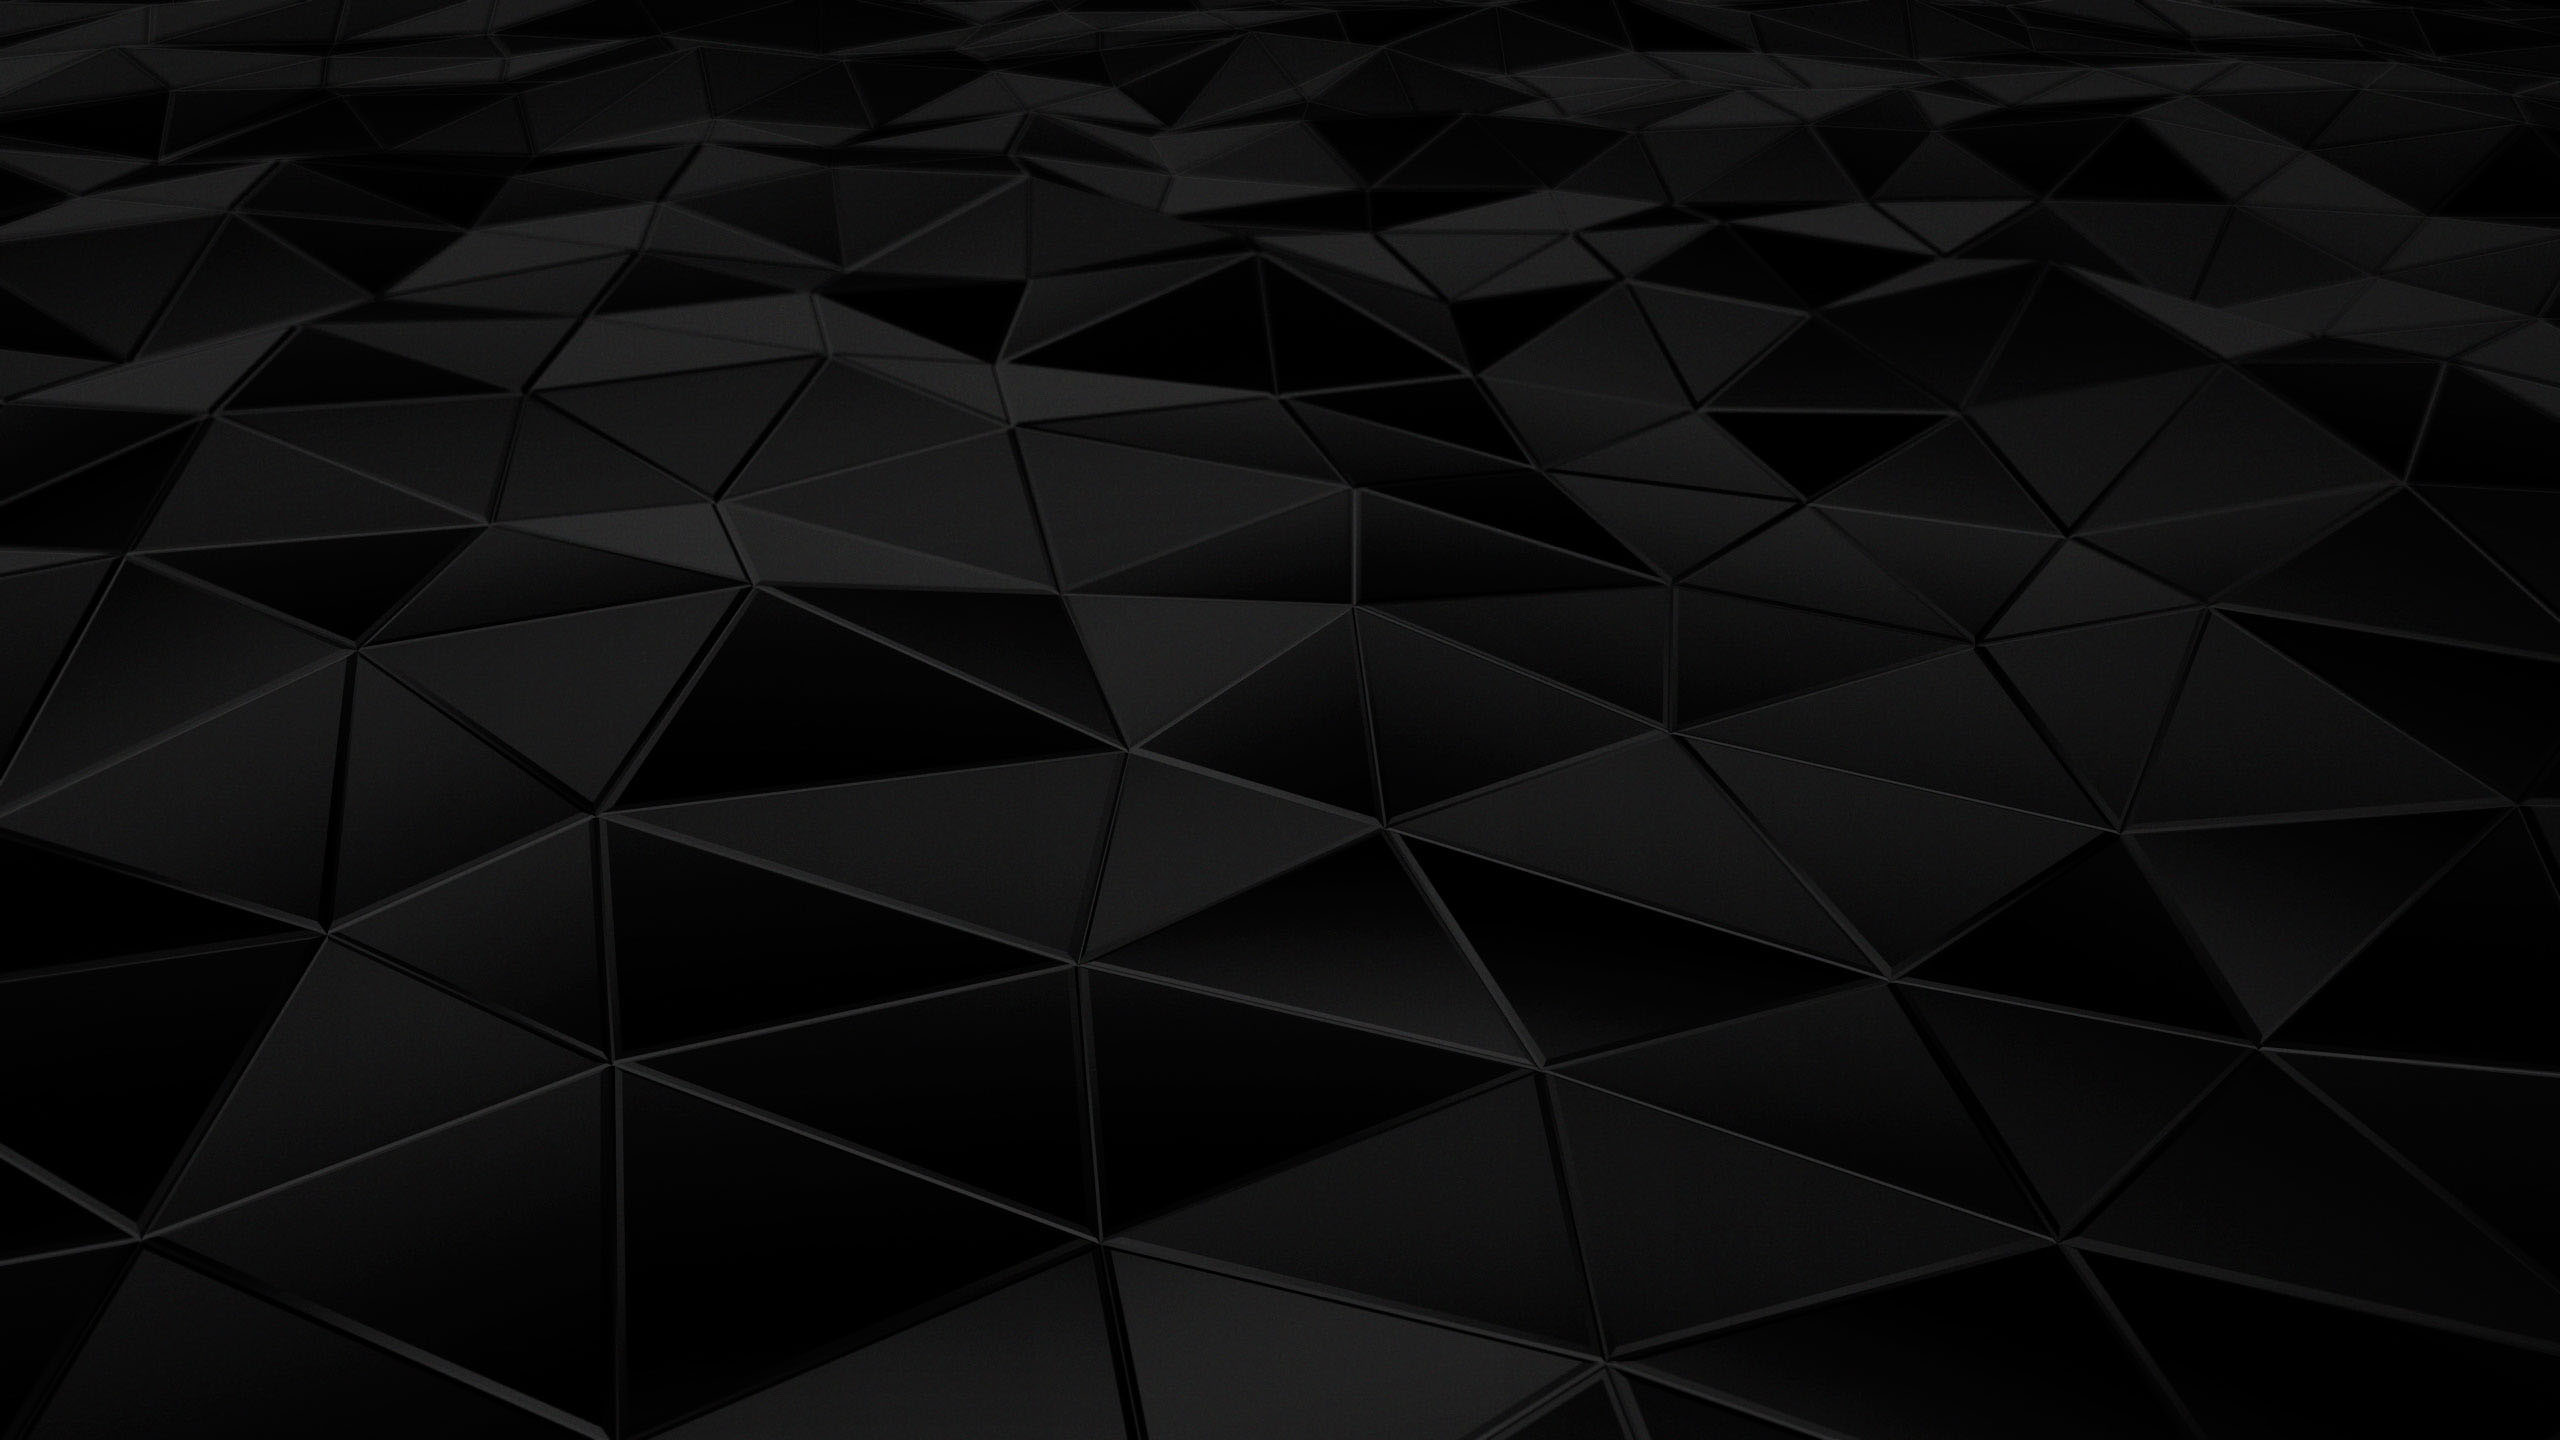 Black Vii Project Type - Black Series By Jean Marc , HD Wallpaper & Backgrounds